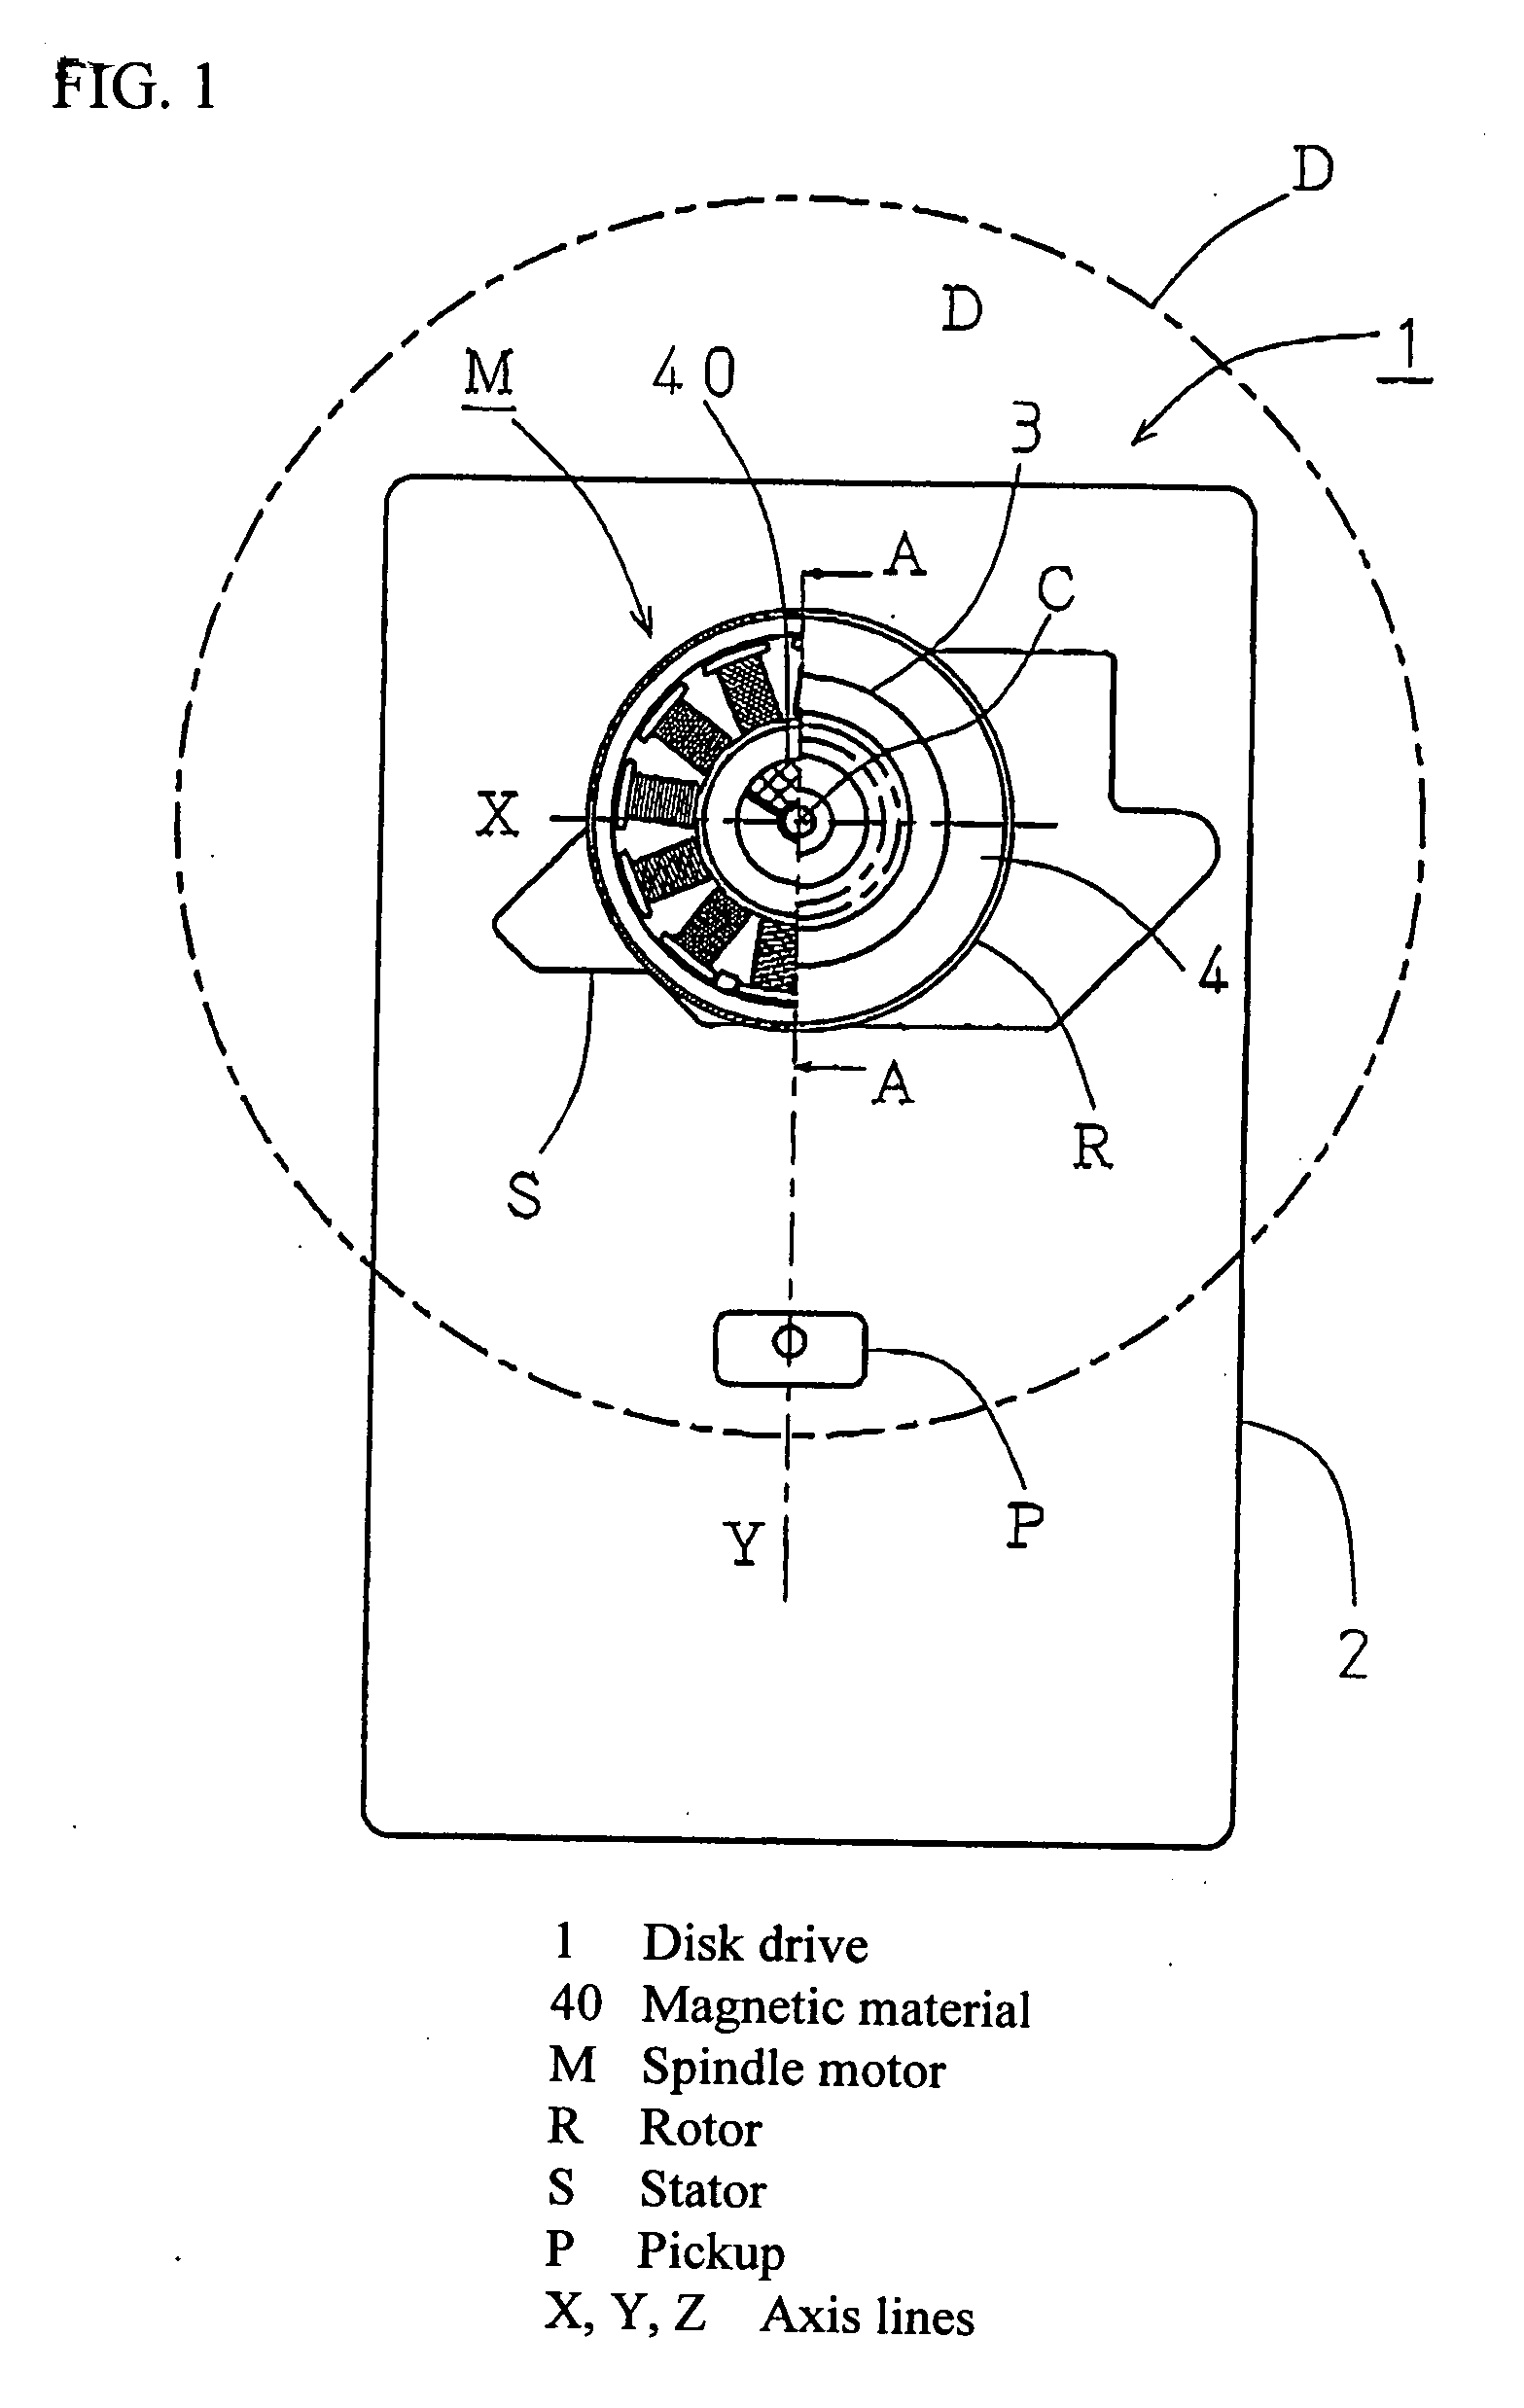 Spindle motor and disk drive device